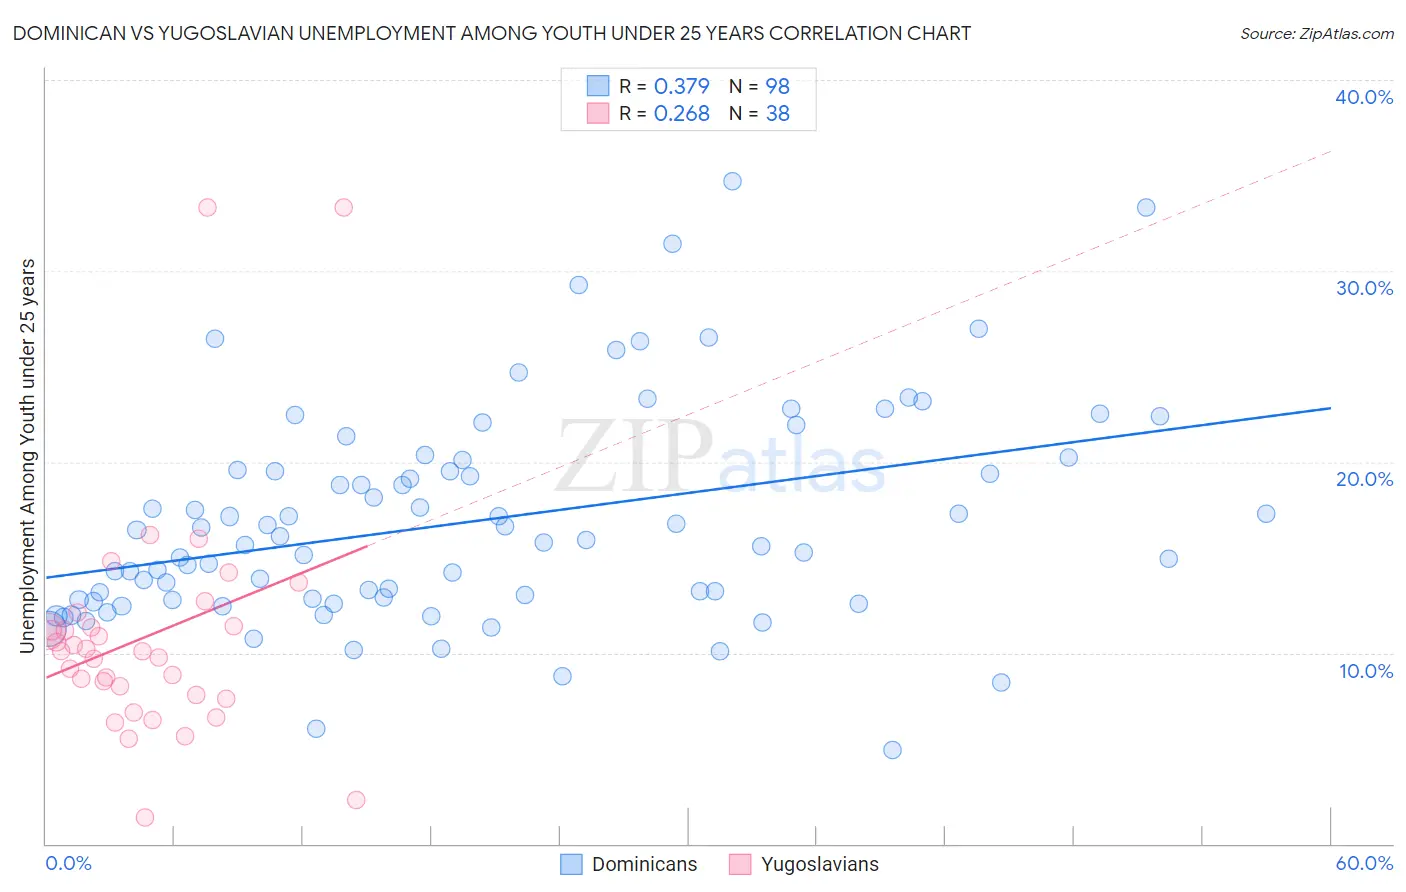 Dominican vs Yugoslavian Unemployment Among Youth under 25 years